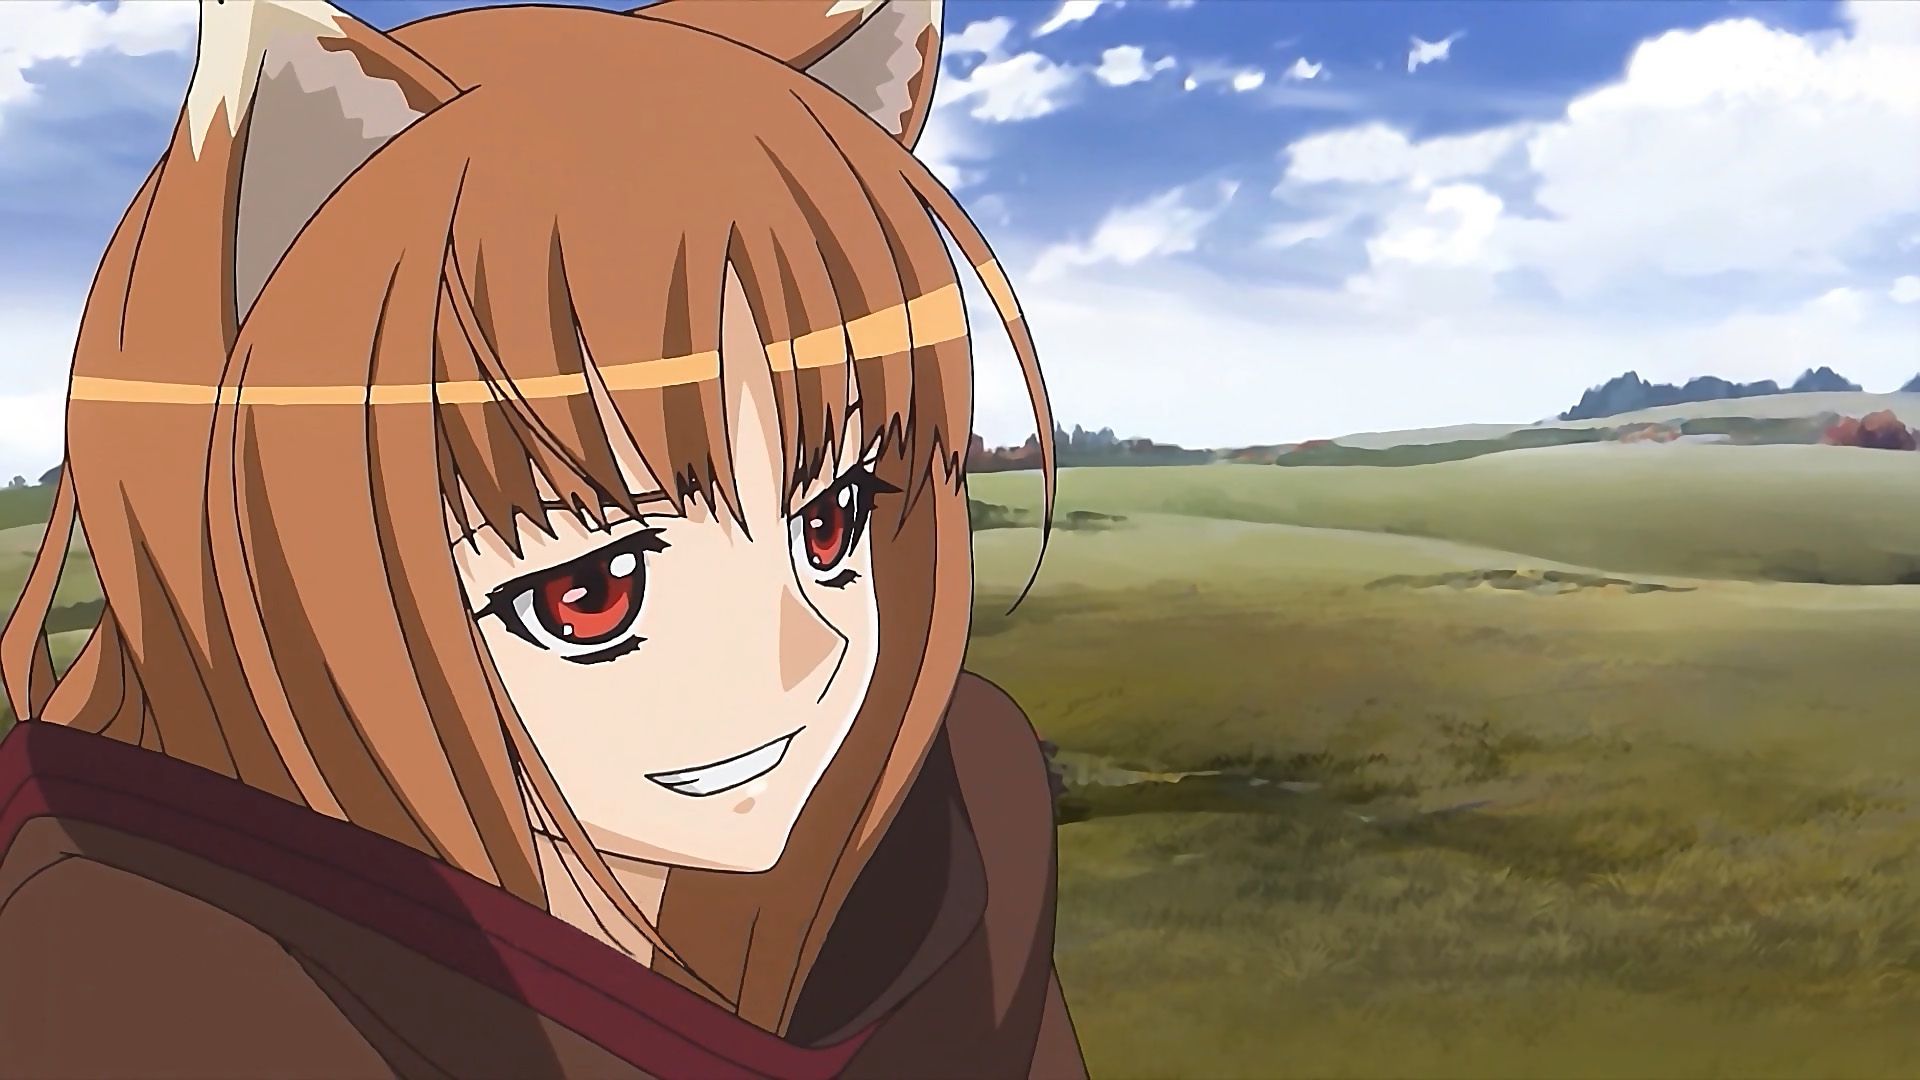 Holo Wallpaper - Anime Holo Spice And Wolf , HD Wallpaper & Backgrounds